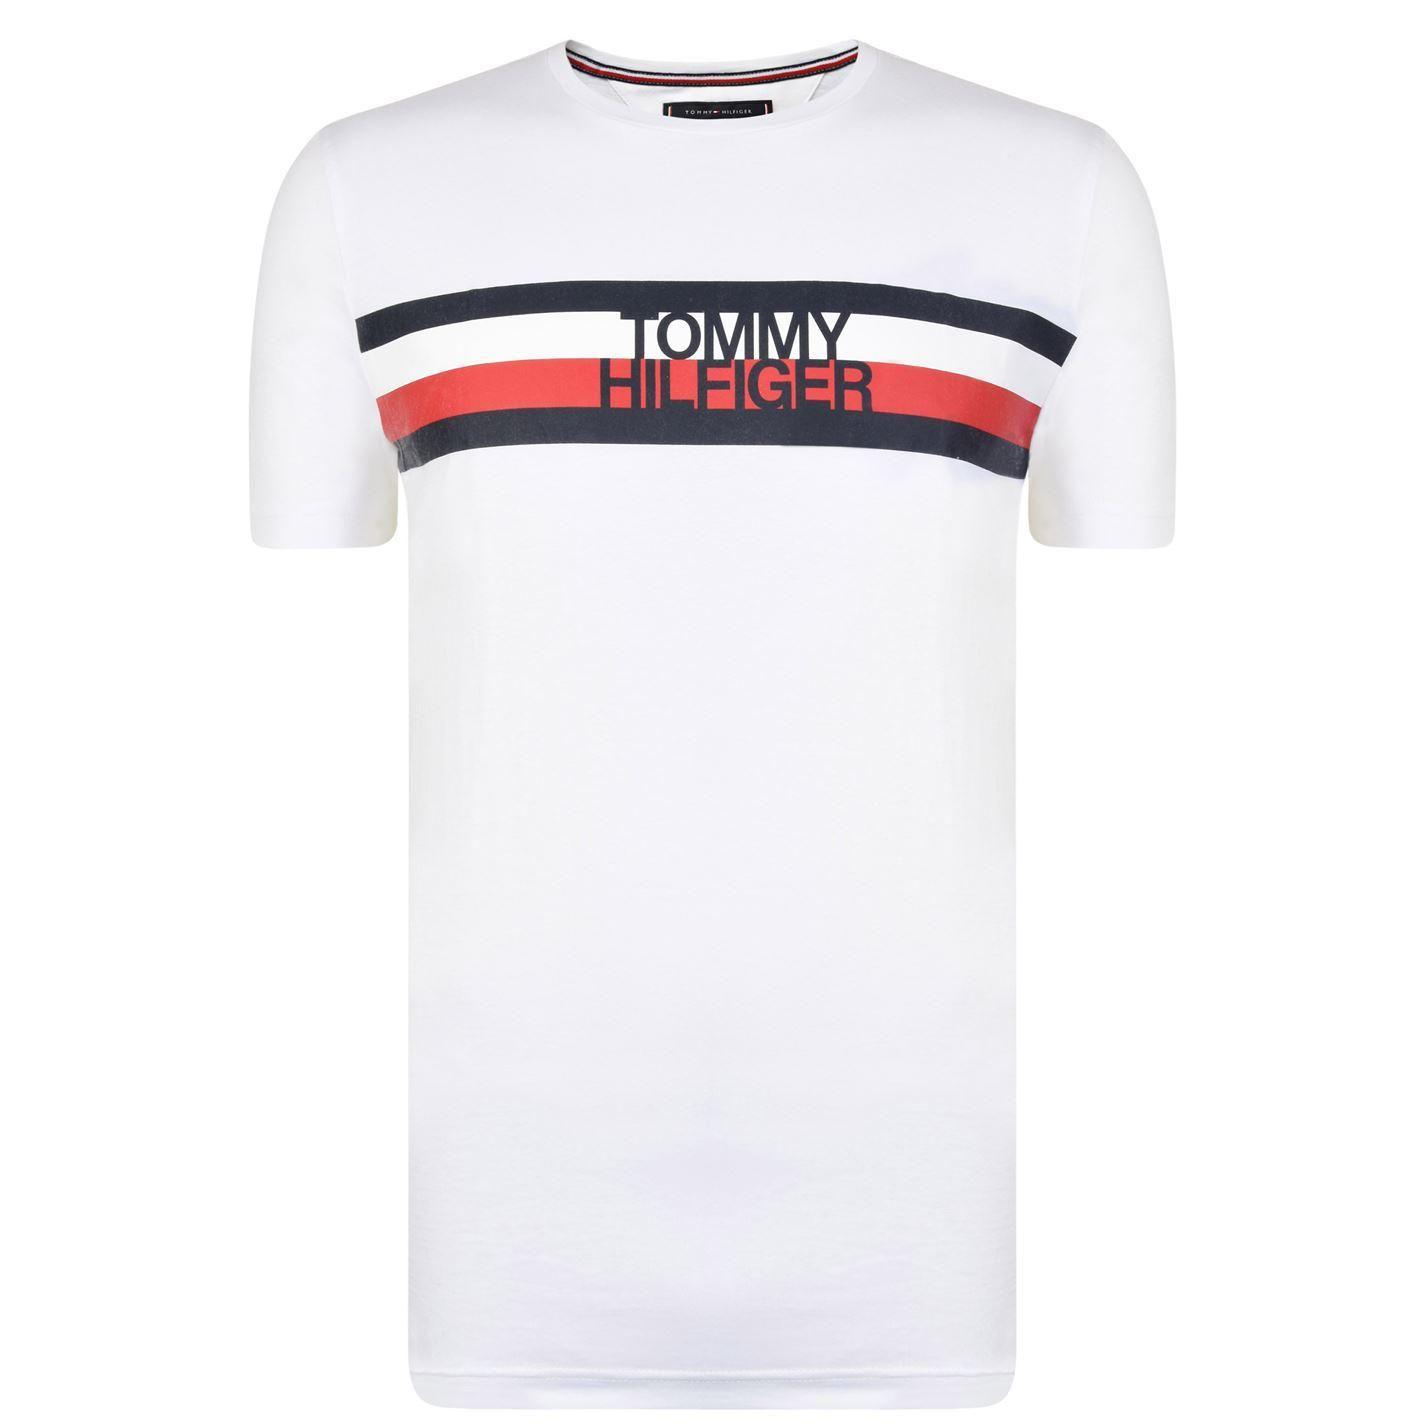 Tommy Hilfiger Signature Logo - Tommy Hilfiger Signature Logo T Shirt in White for Men - Lyst